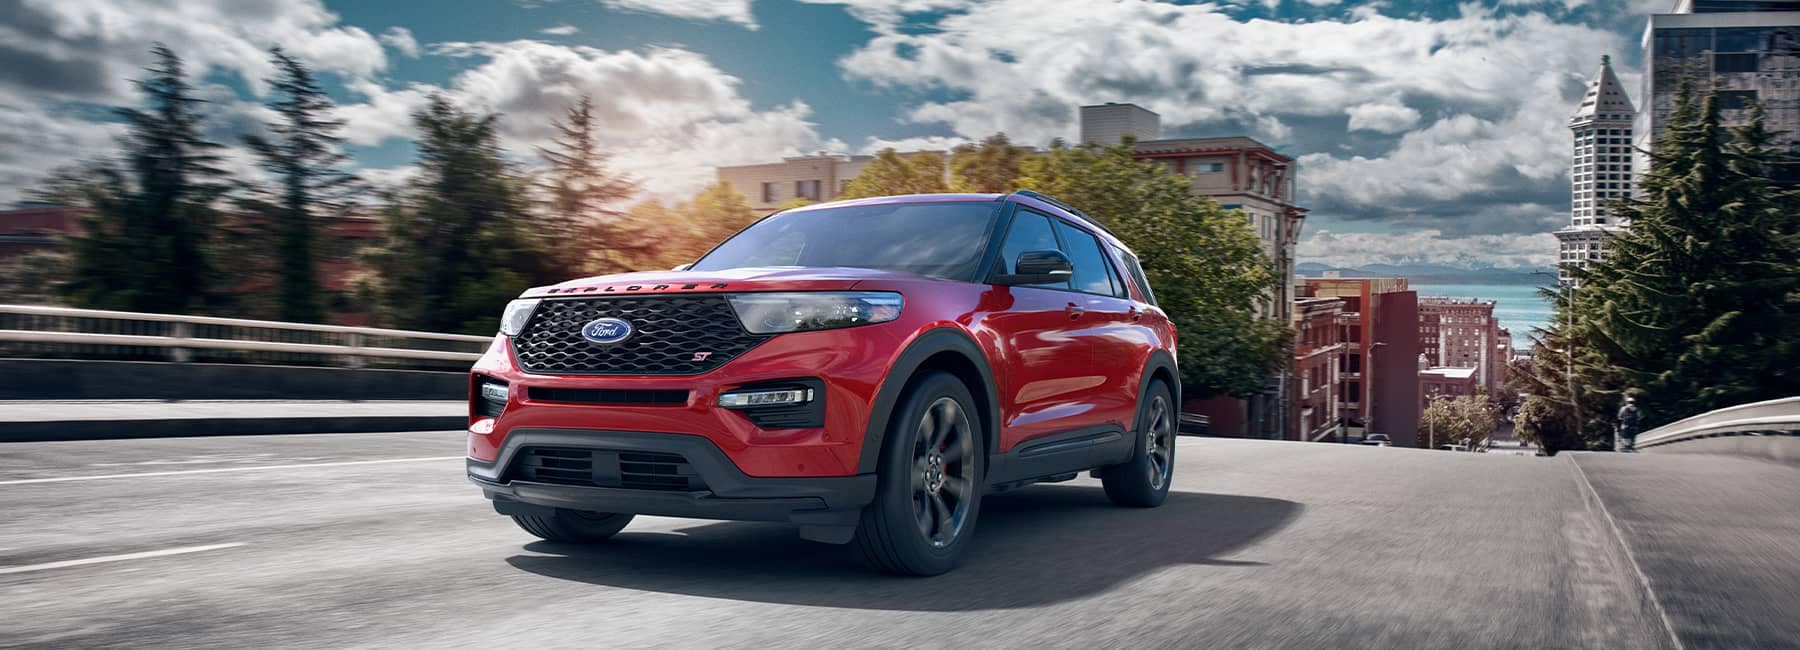 Red 2021 Ford Explorer driving up a hill out of a city